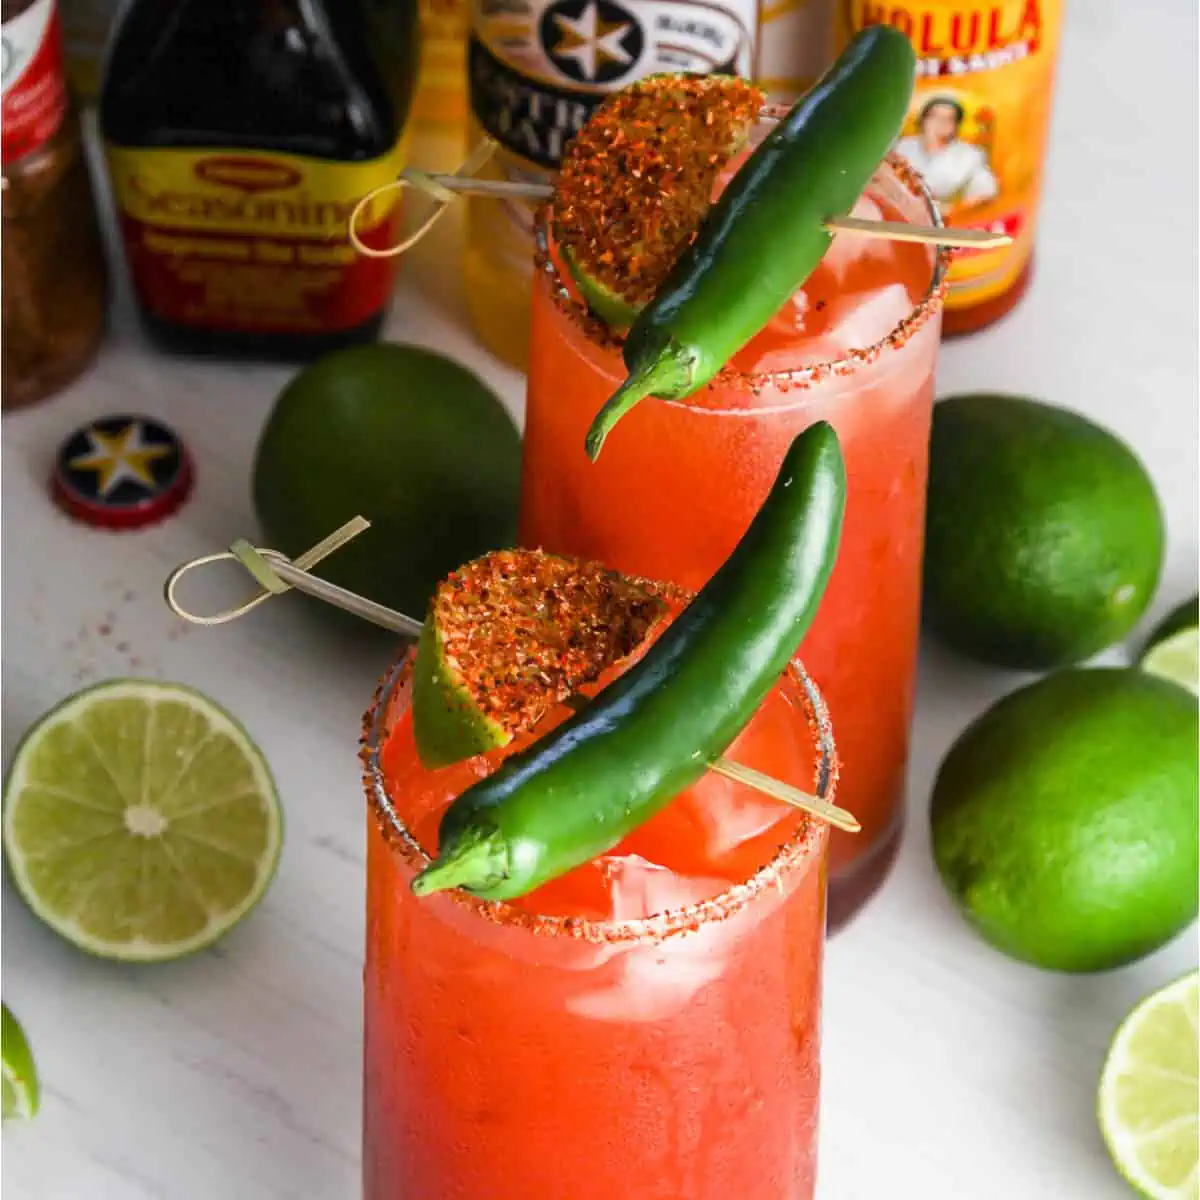 A tall glass filled with michelada garnished with green chili and spice coated lime slice.